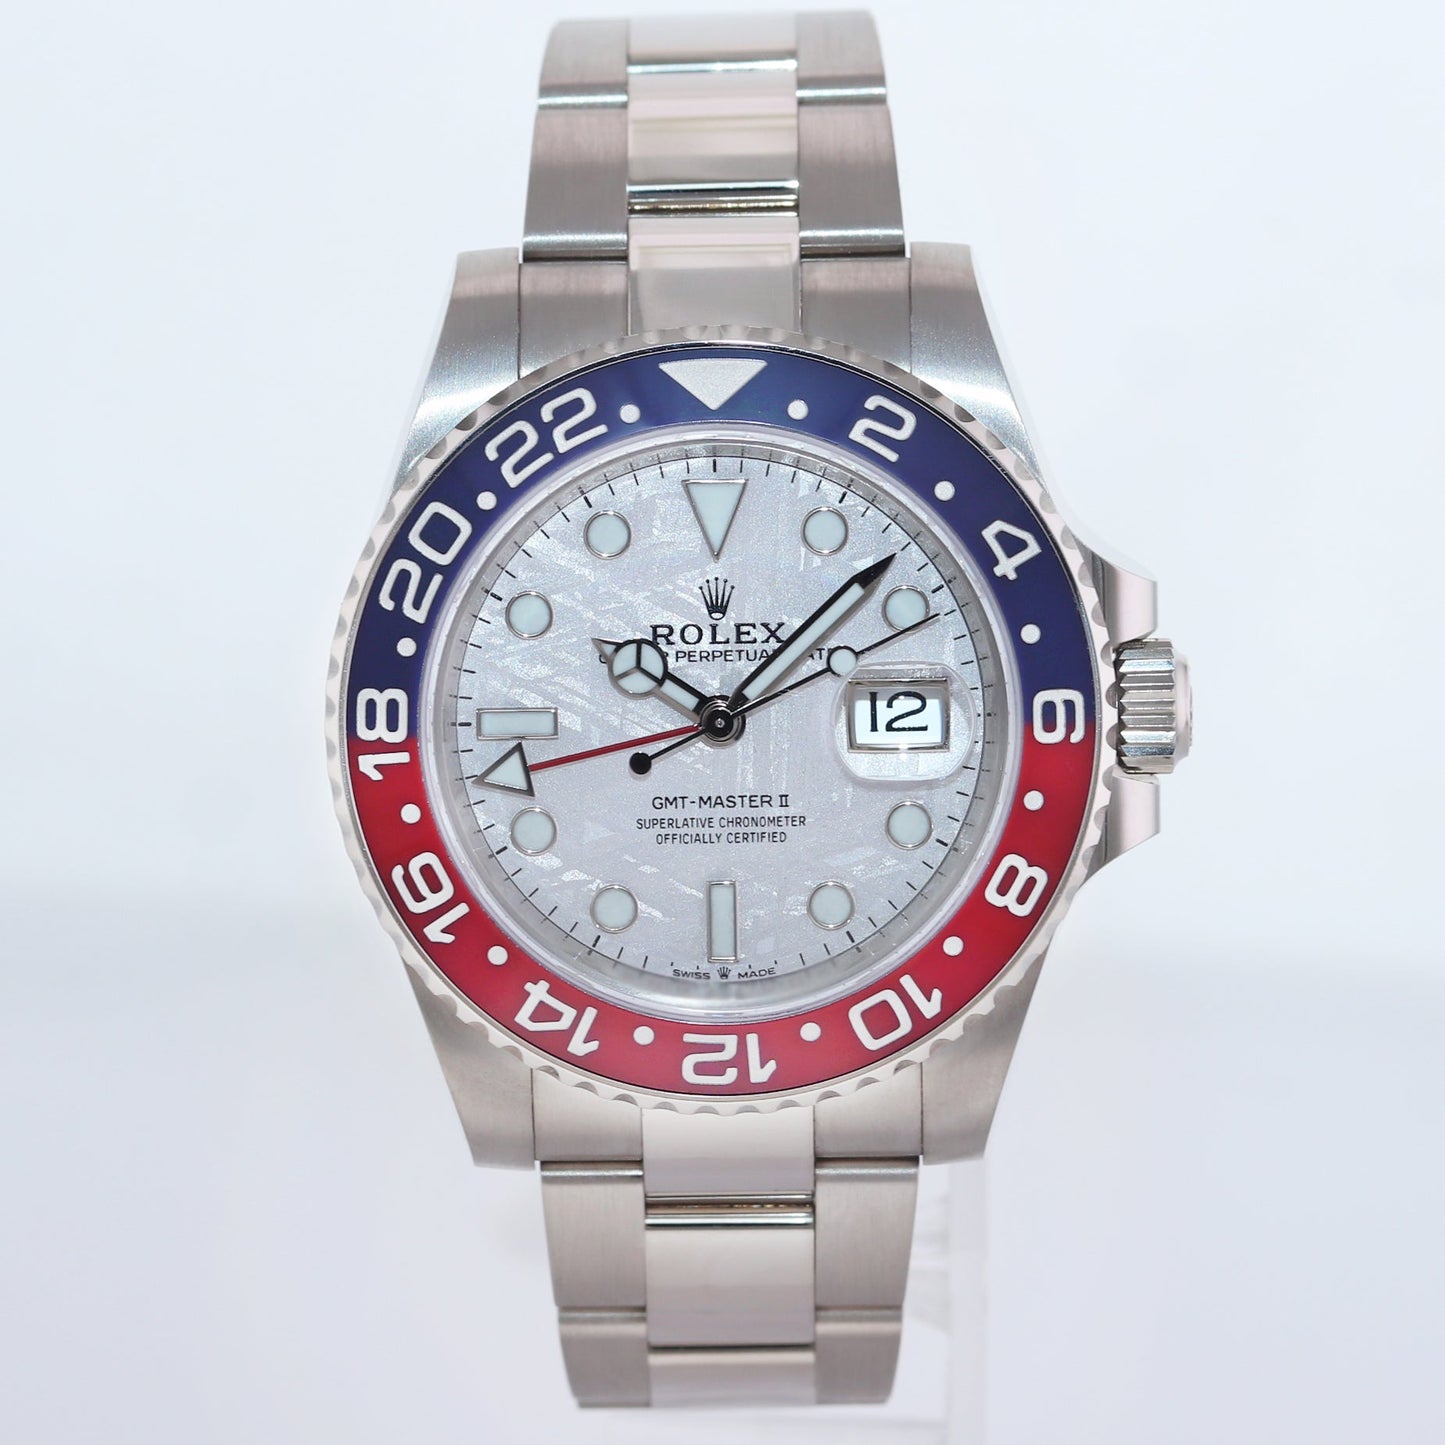 2022 NEW PAPERS Rolex GMT-Master II 126719 Pepsi METEORITE White Gold Watch Box